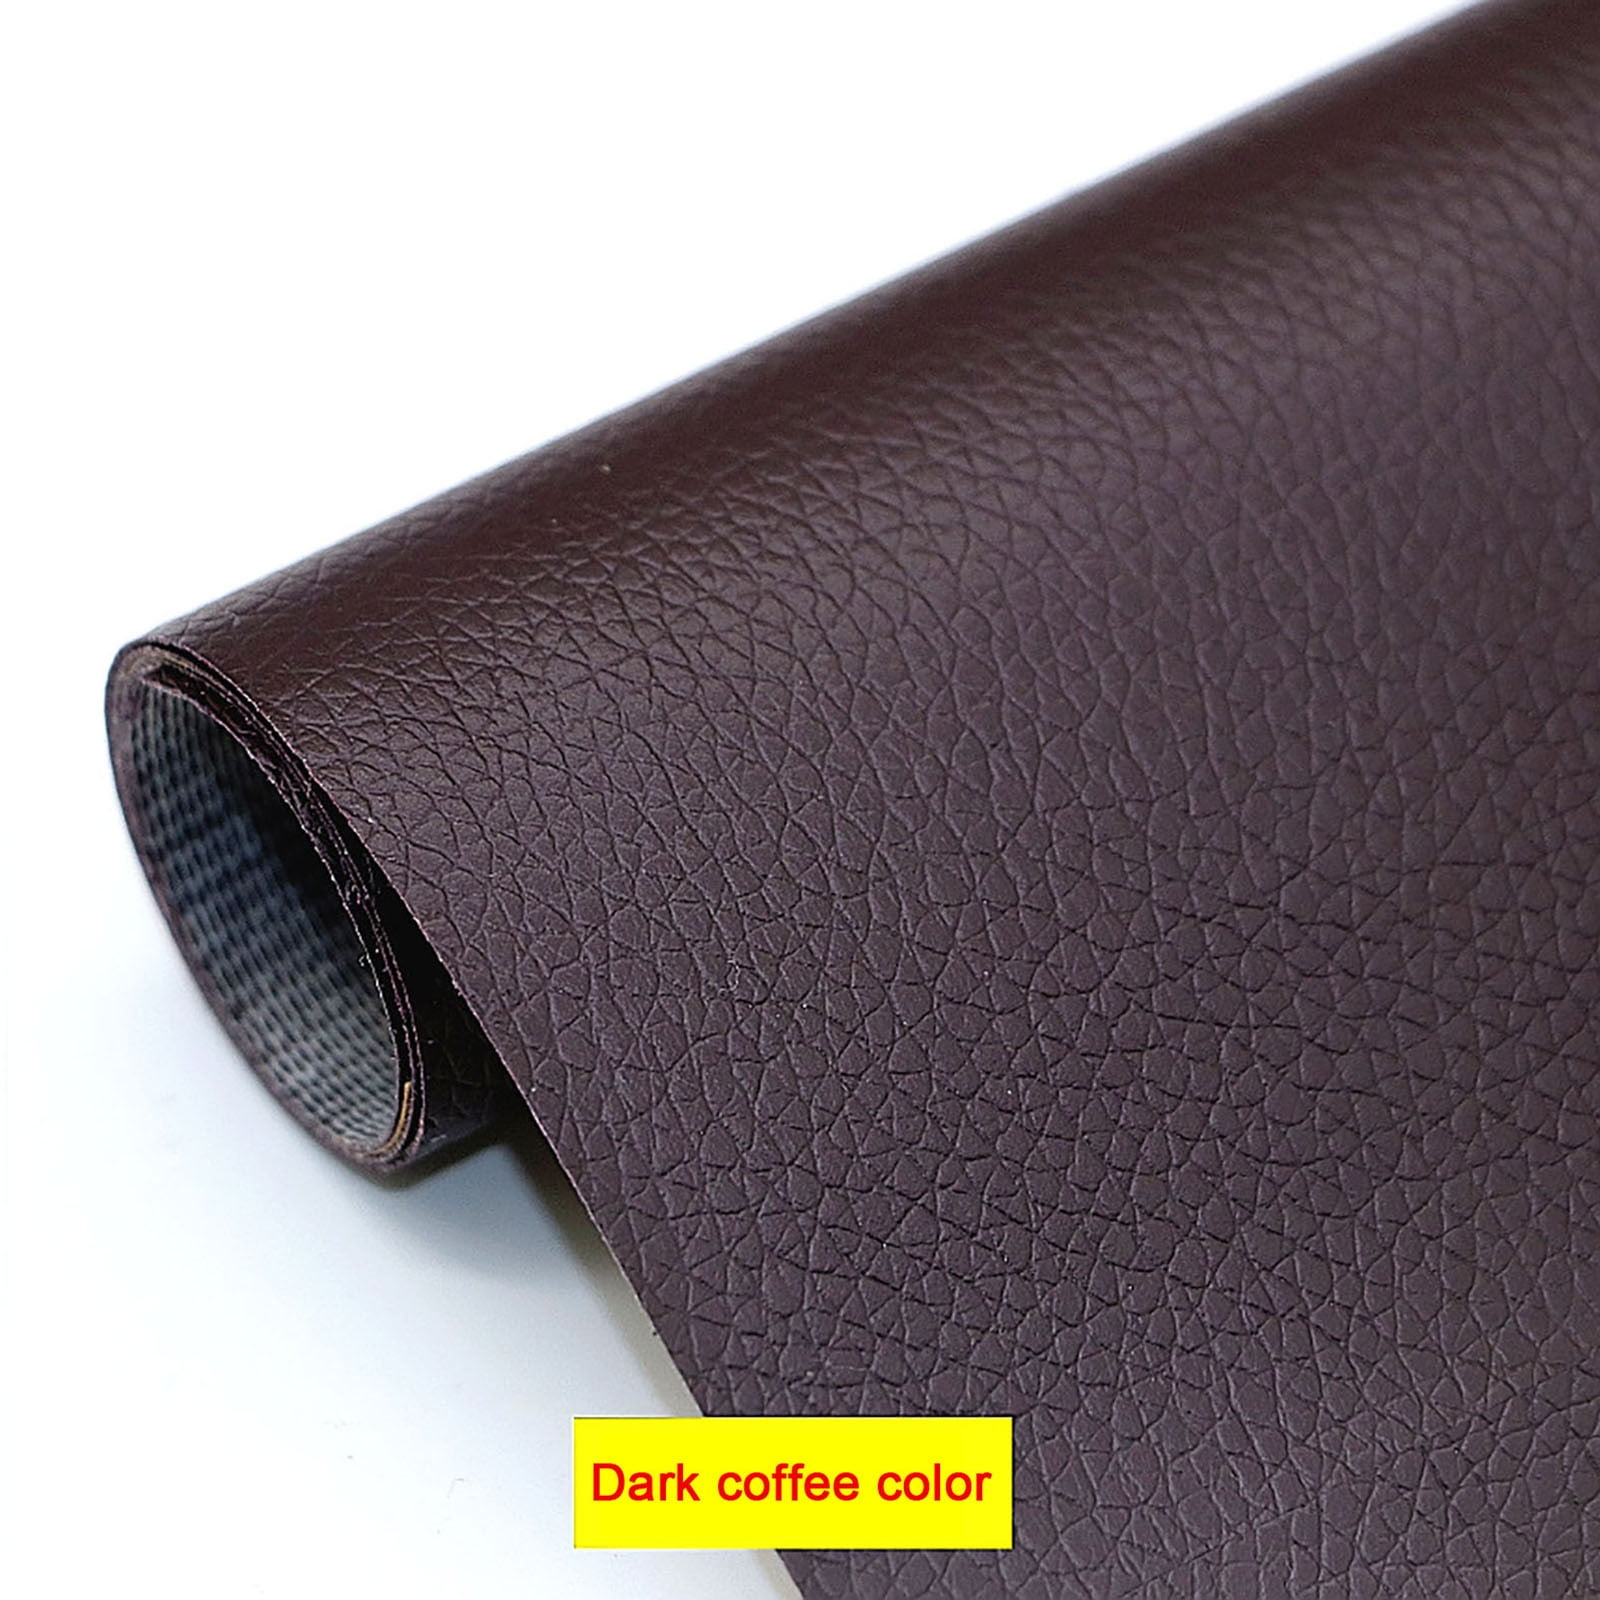 Light Brown 35 * 137cm Self-adhesive Leather Patch For Sofa Repair, Leather  Seat Patch, Adhesive Back Leather Fabric